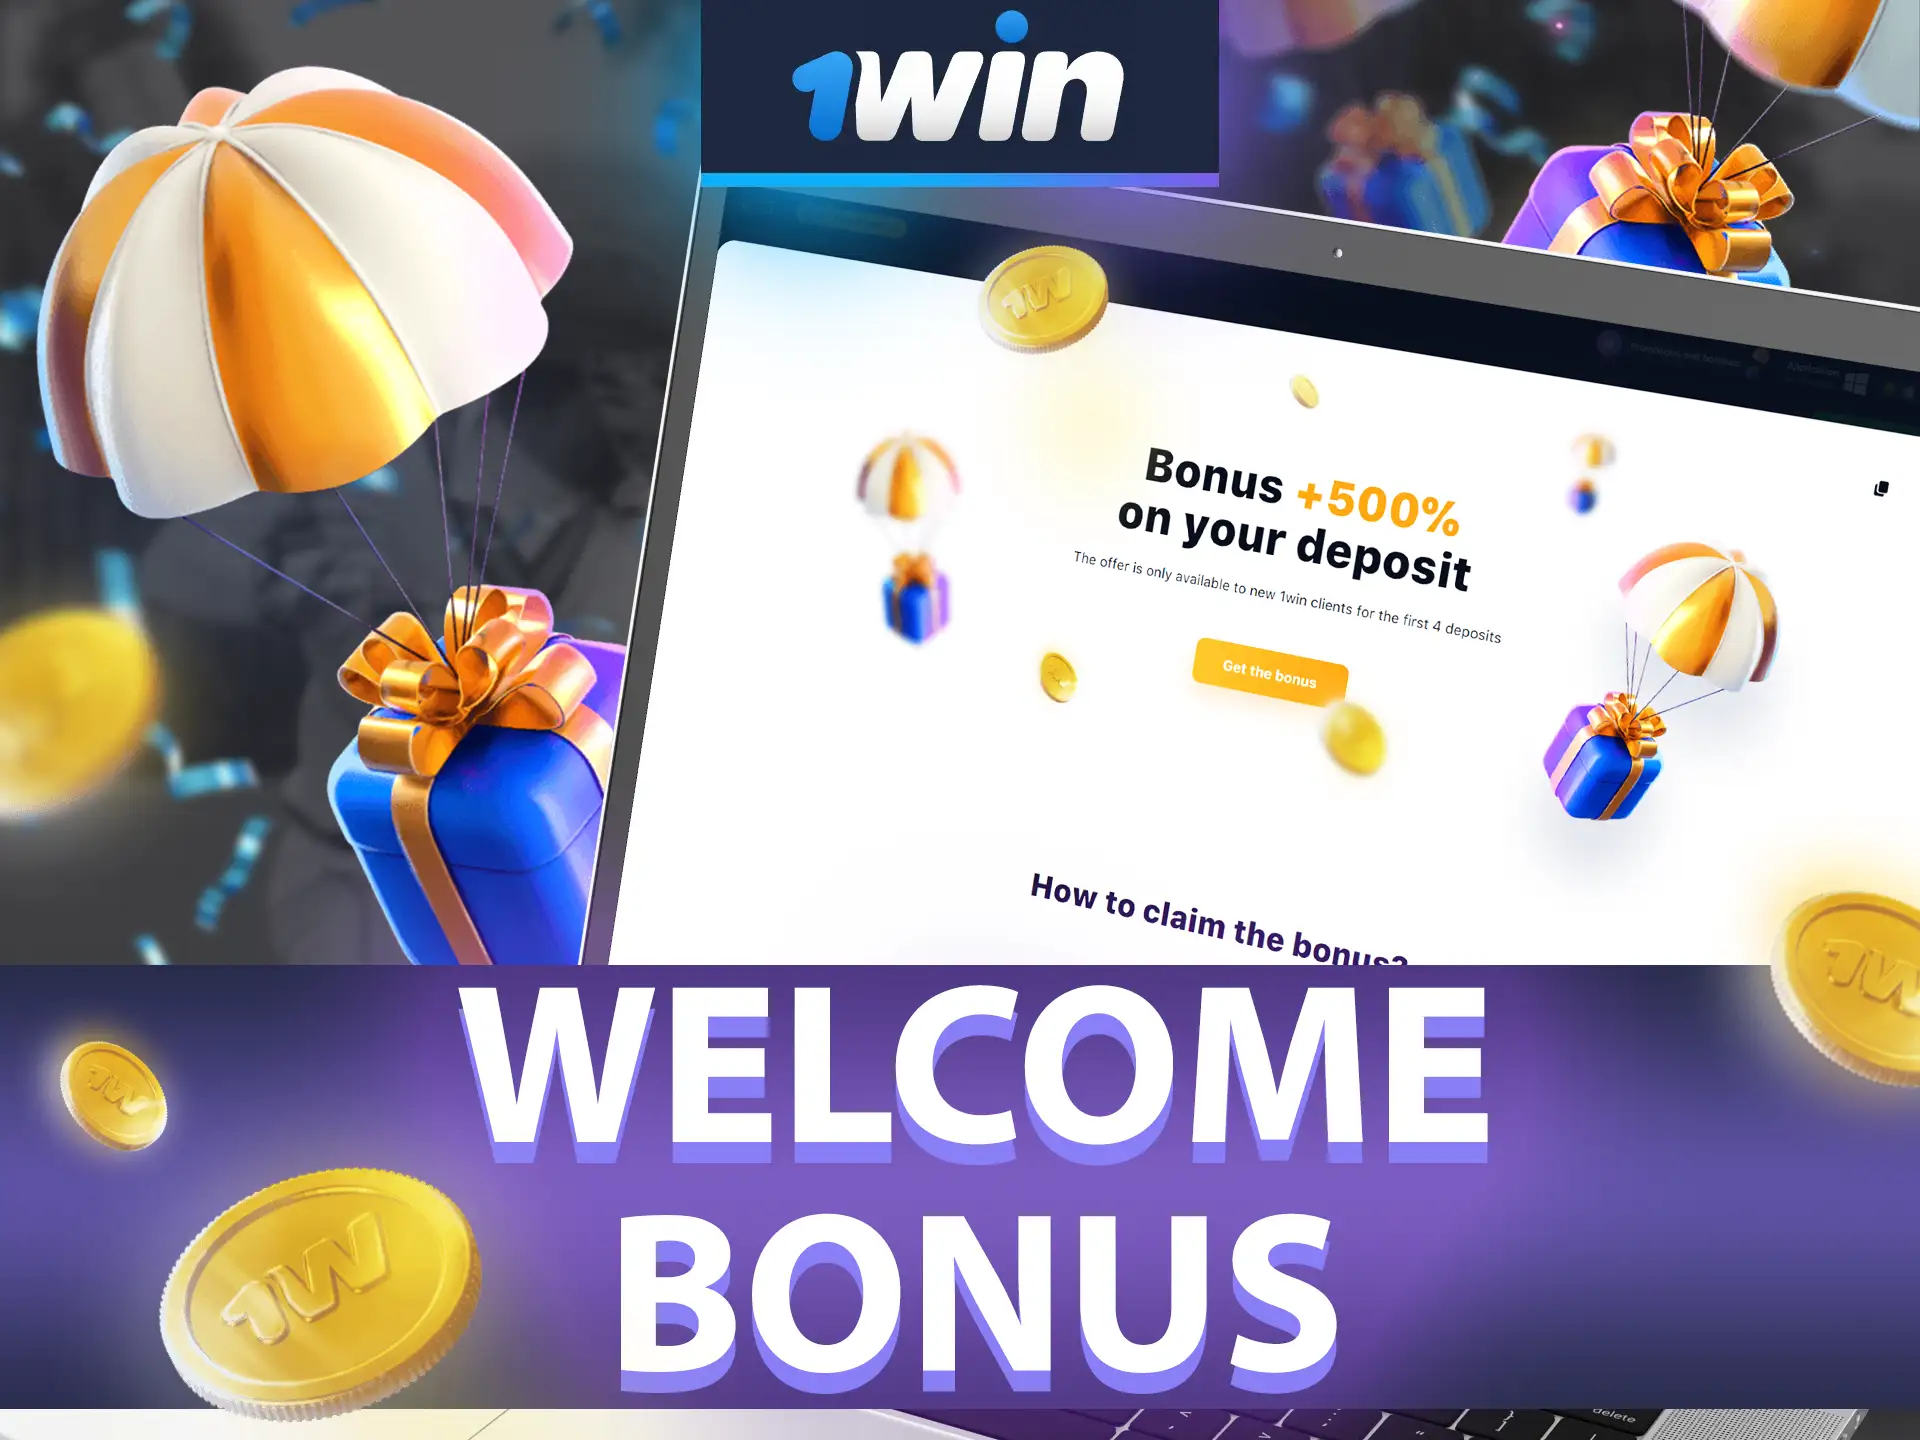 Claim your welcome bonus of up to INR 80,400 after registering at 1win.